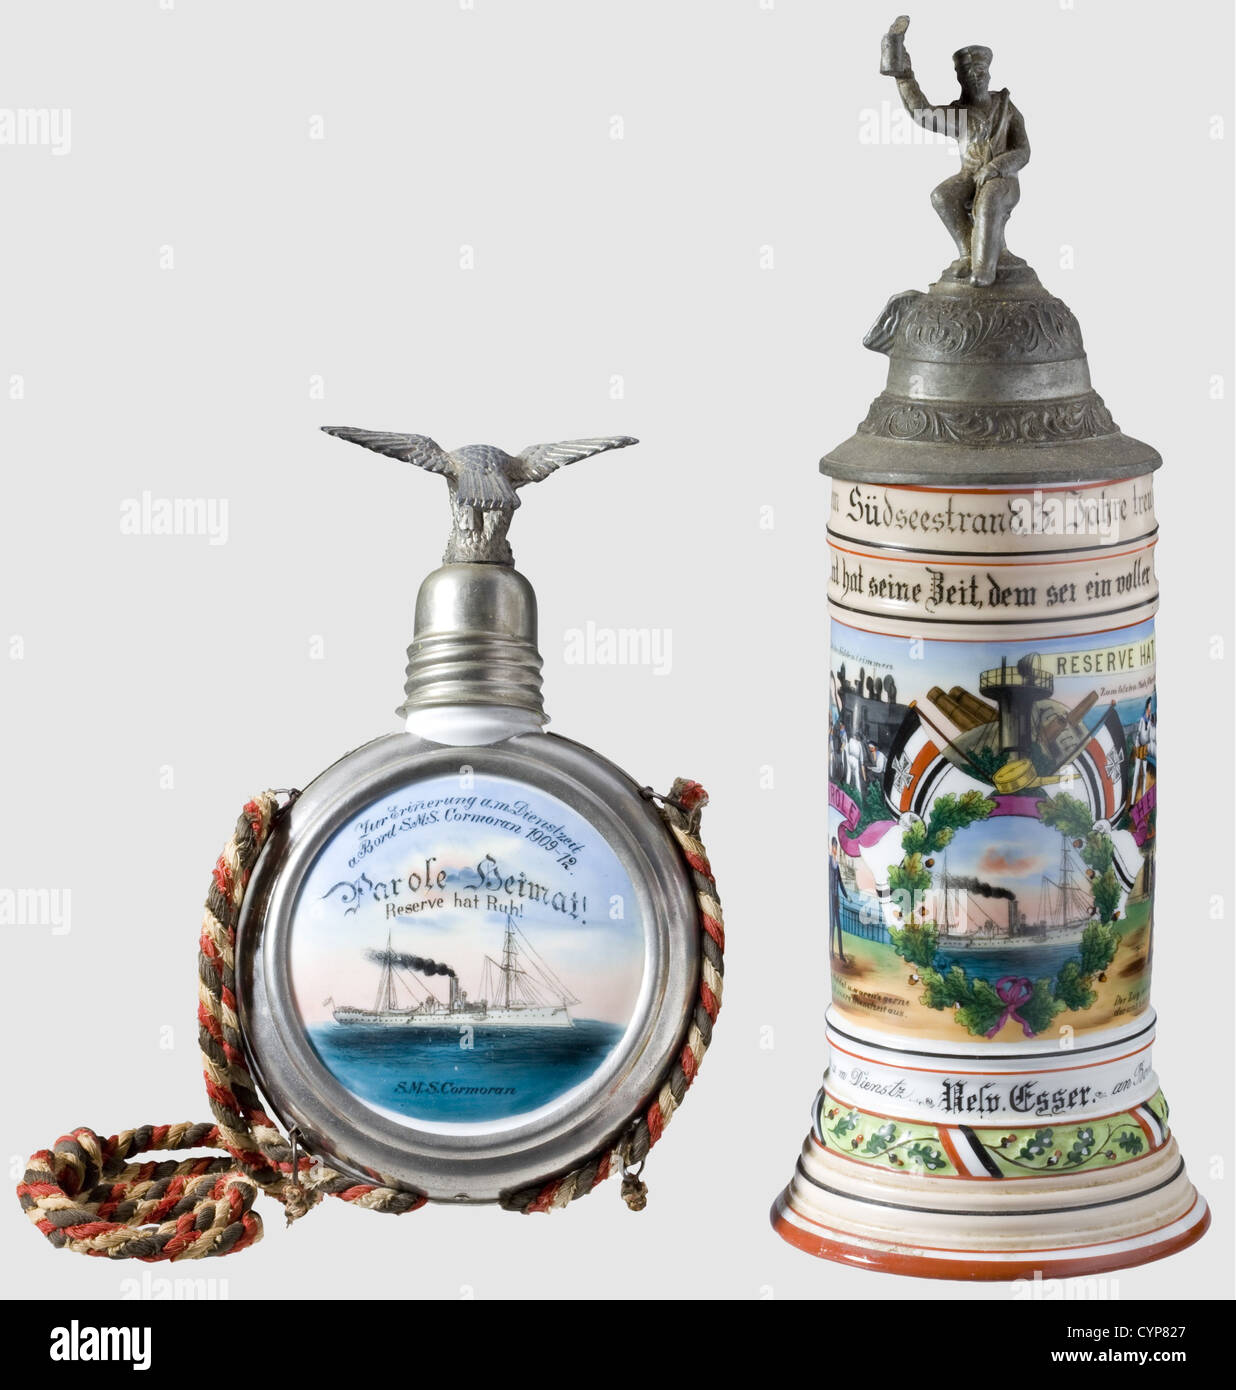 The German Reich - S.M.S.'Cormoran',A porcelain jug and a bottle of the reservist Esser,1909/12.Jug with lithograph/hand-made paintings with a depiction of the cruise ship on the front,celebrating marines and greeting scene.Inscription 'Resv.Esser an Bord S.M.S.Cormoran.1909/12'(reservist Esser aboard of the S.M.S.Cormoran.1909/12).On the bottom lithophane picture showing the farewell of a marine.Pewter lid(slightly dented at the reverse edge)showing drinking marines and with a rising eagle on the thumb lever.Height 31 cm.With it the matching ,Additional-Rights-Clearences-Not Available Stock Photo